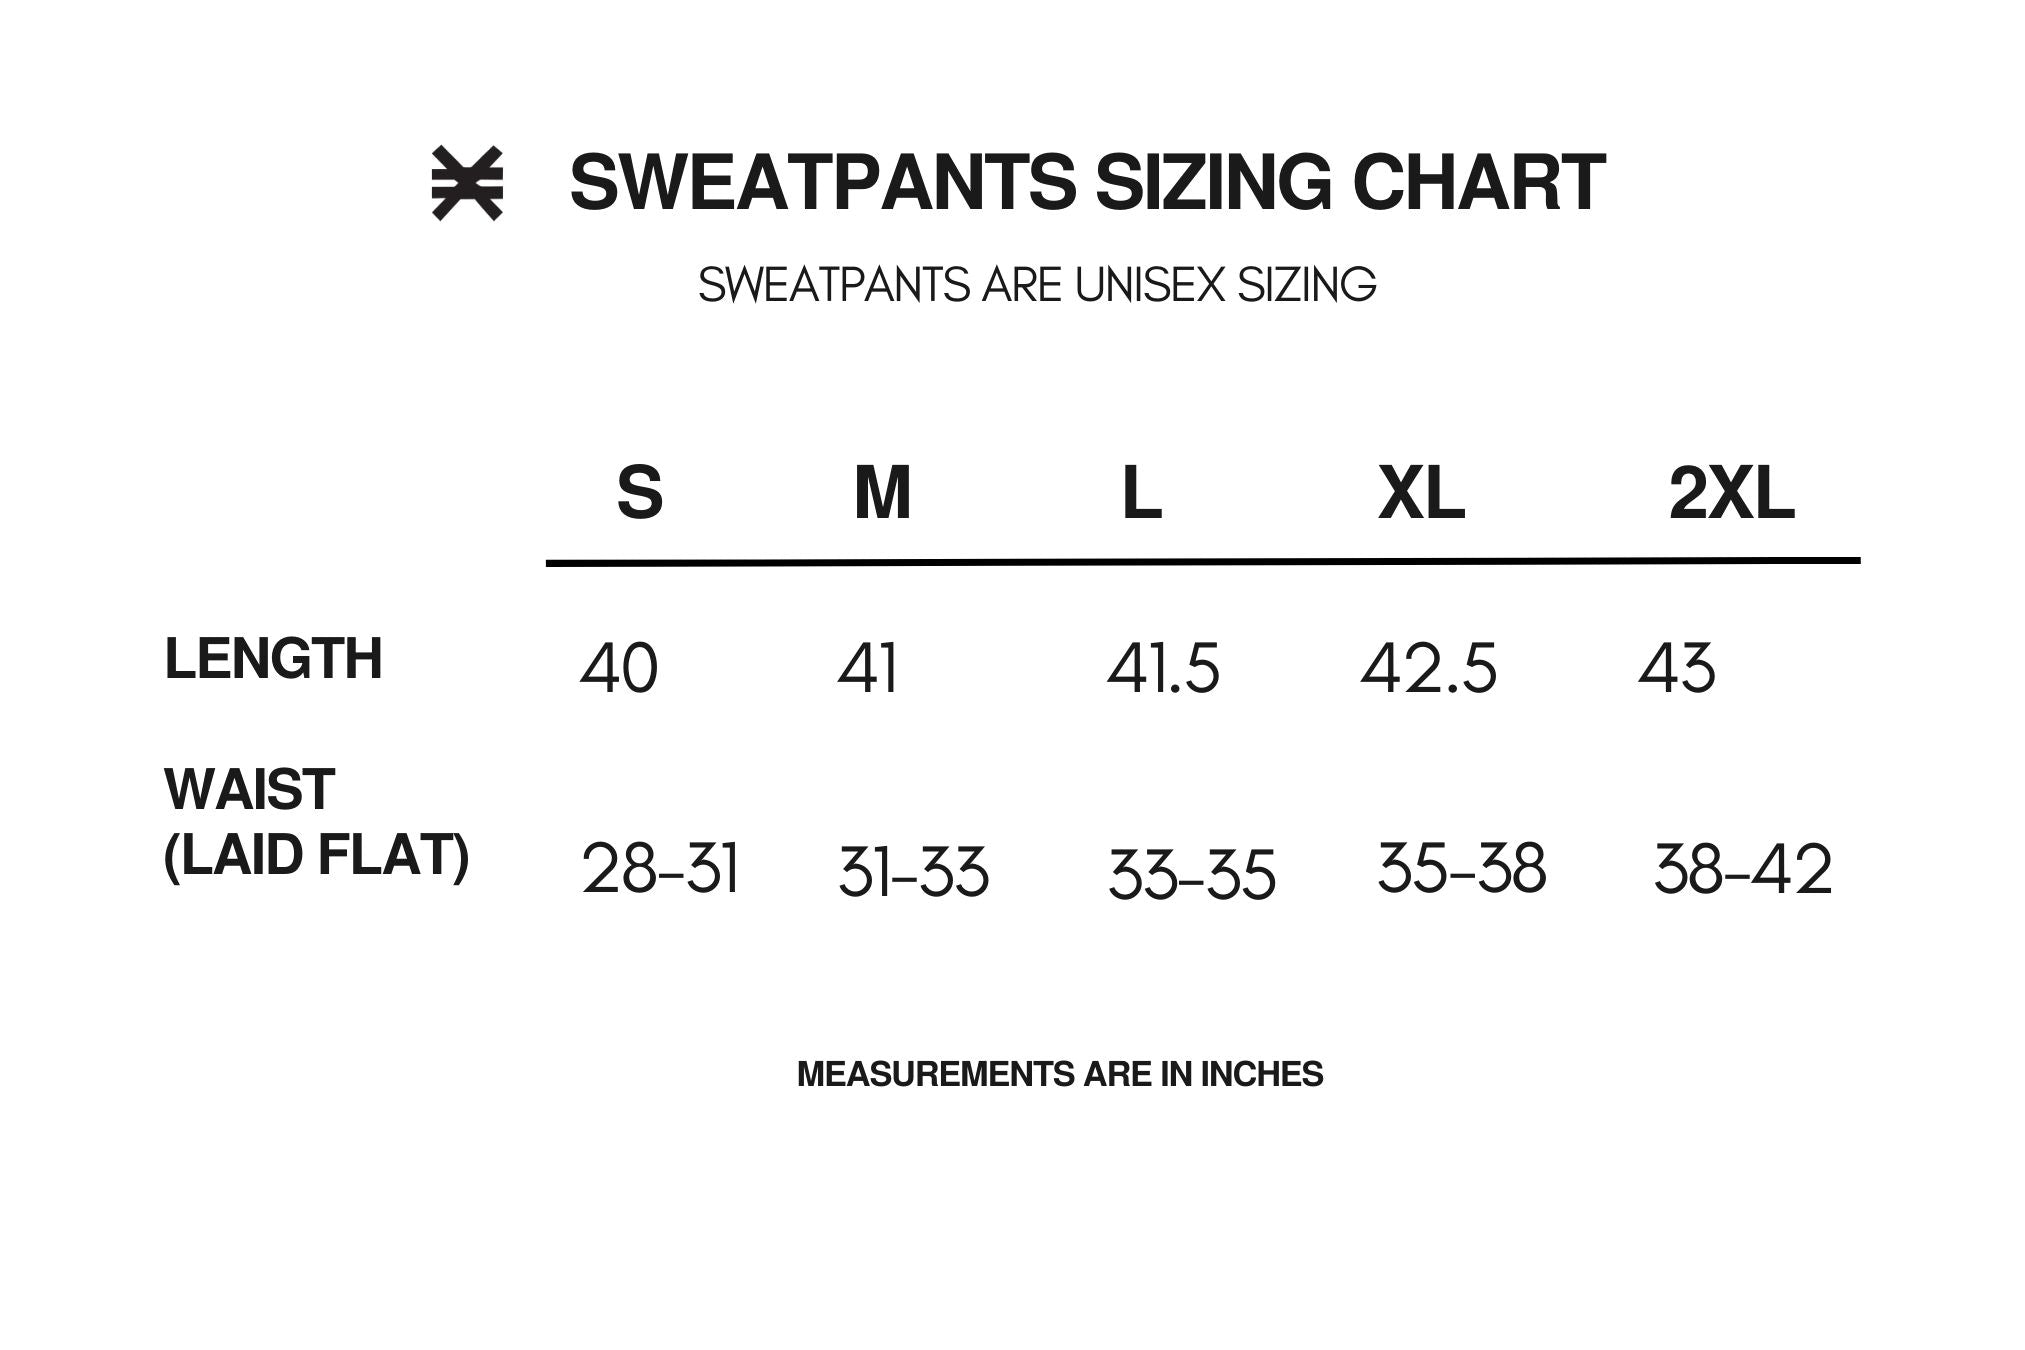 sweatpants size chart length and waist dimensions sizes small through 2xl for men and women